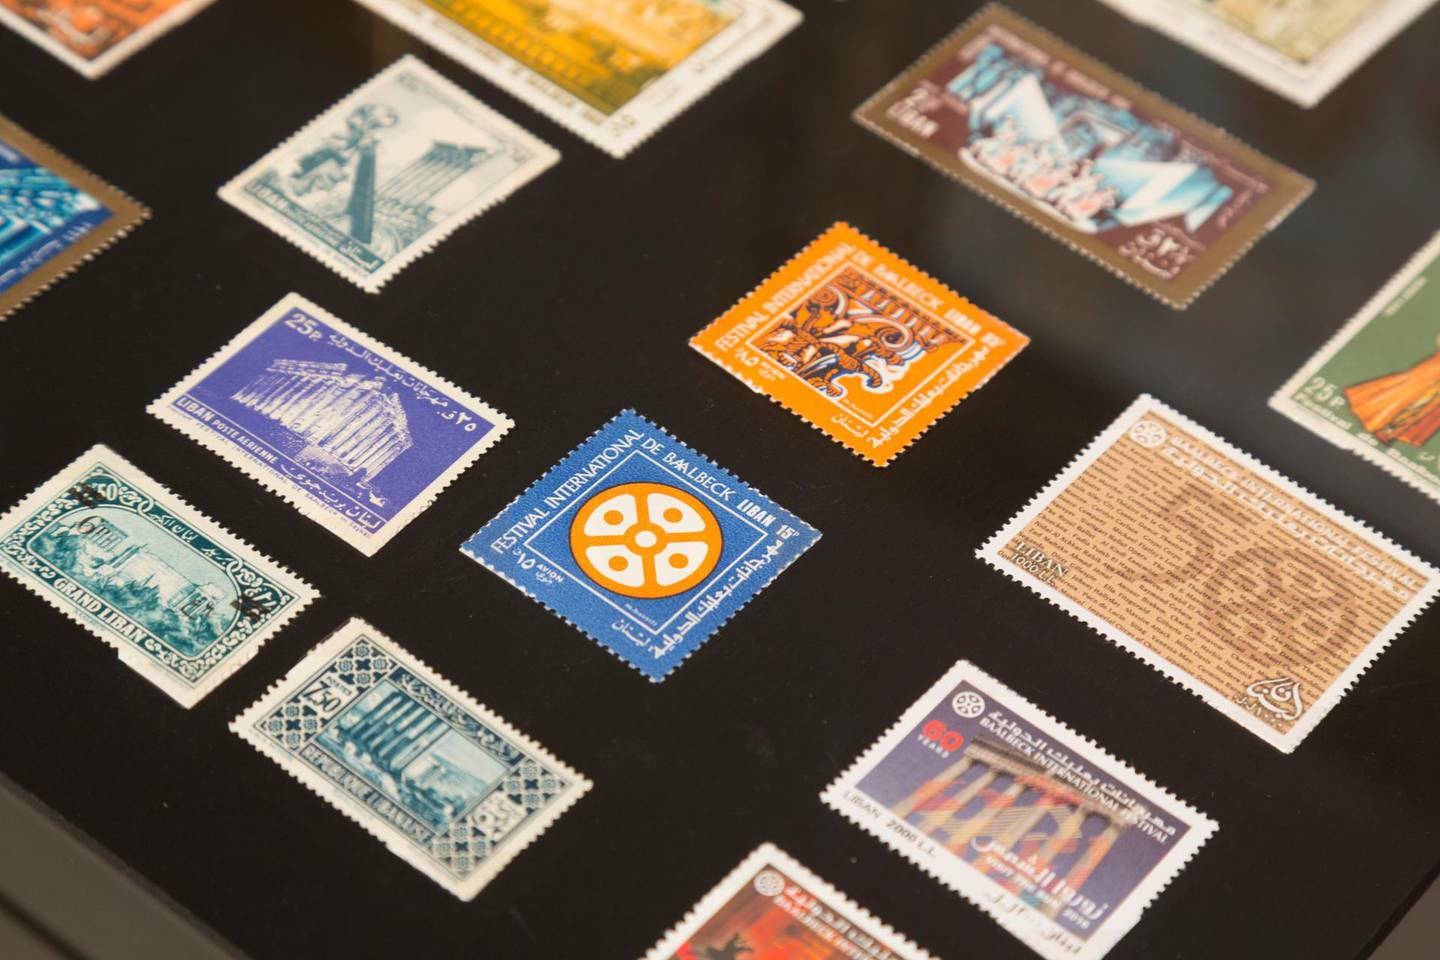 Stamps featuring Baalbek on display at the exhibition. Photos by Christopher Baaklini. Courtesy of Sursock Museum